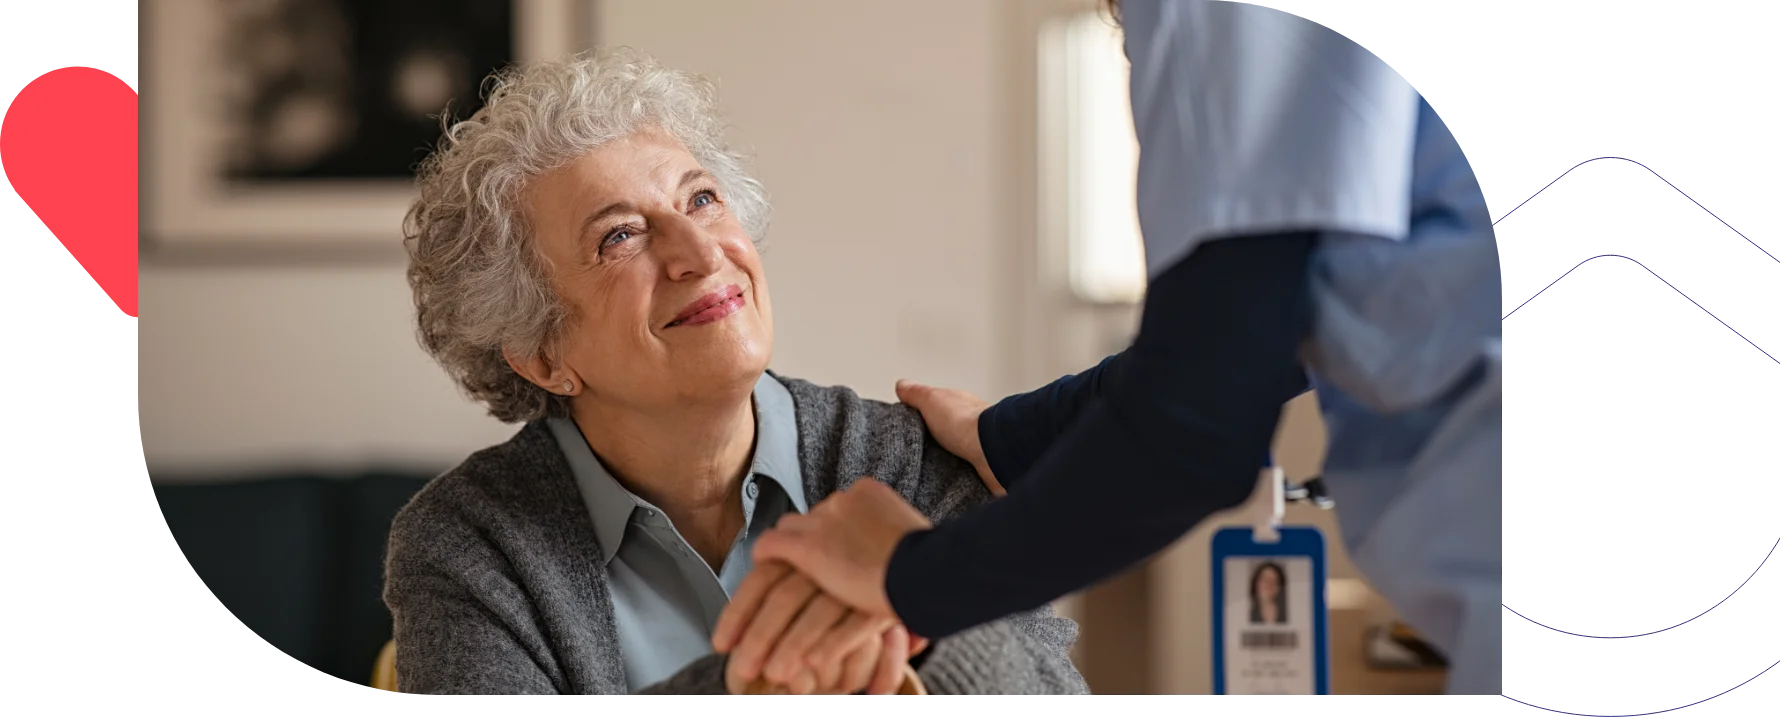 A smiling elderly woman looking up at a healthcare worker who is gently holding her hand.